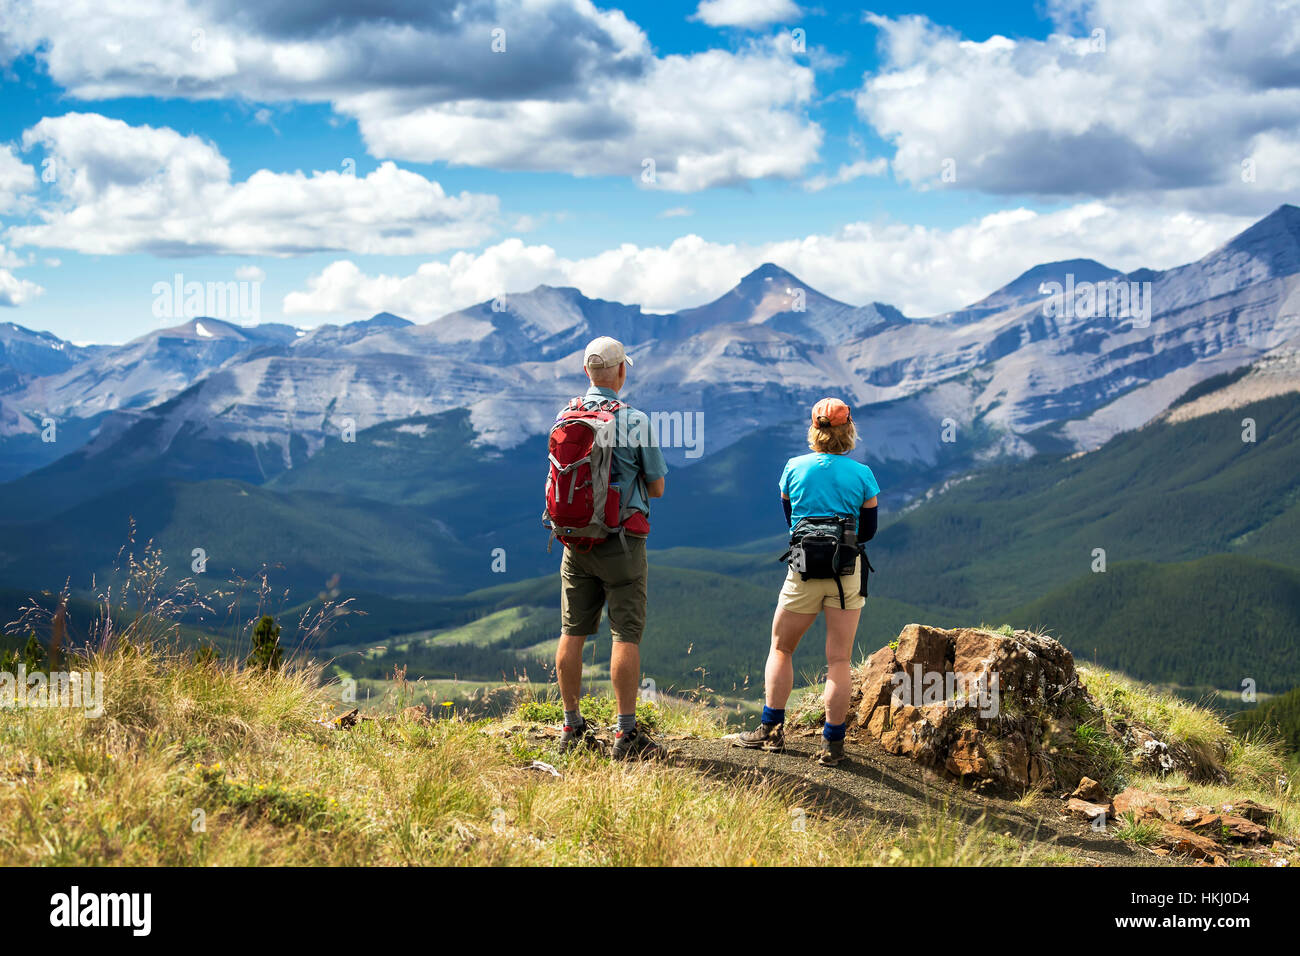 Male and female hikers standing on top of rocky hill overlooking mountain range and valley with blue sky and clouds, West of Bragg Creek Stock Photo